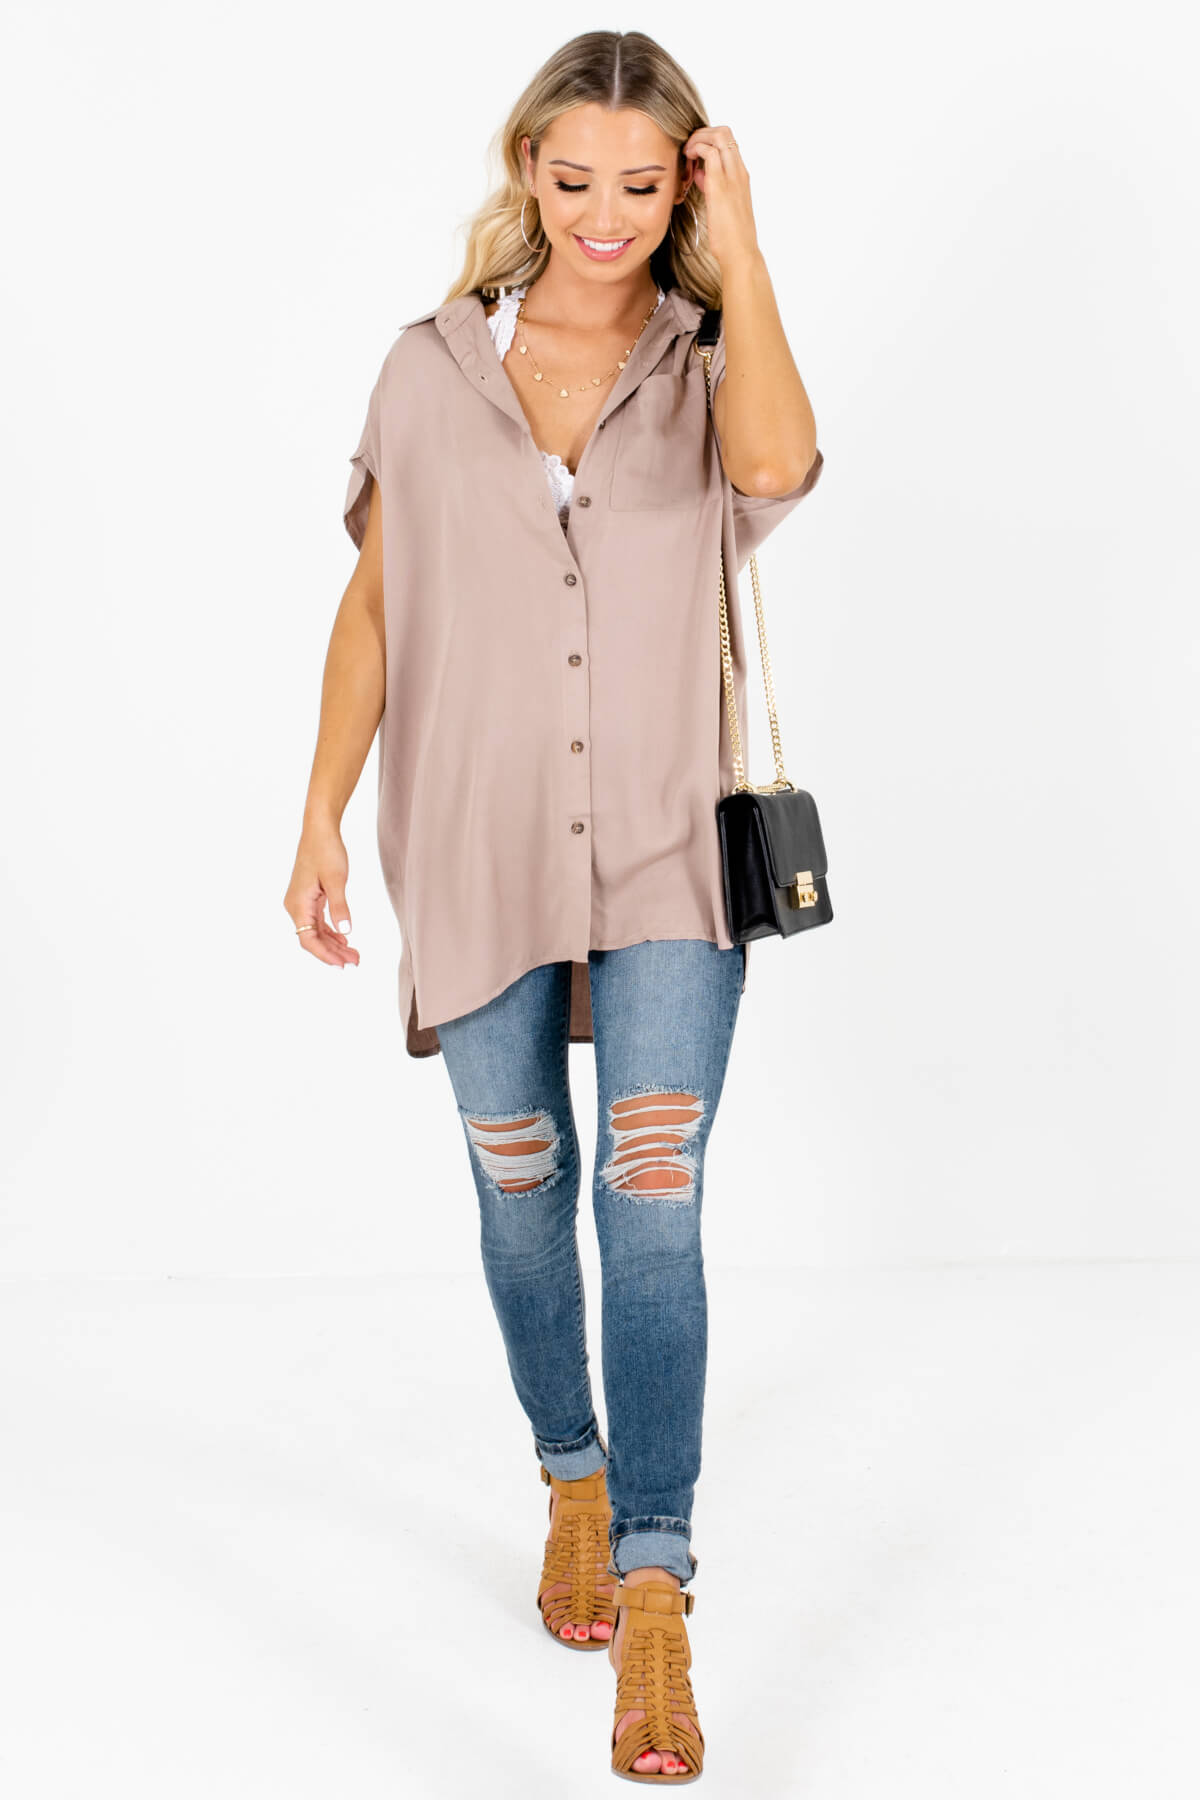 Women's Taupe Brown Spring and Summertime Boutique Clothing